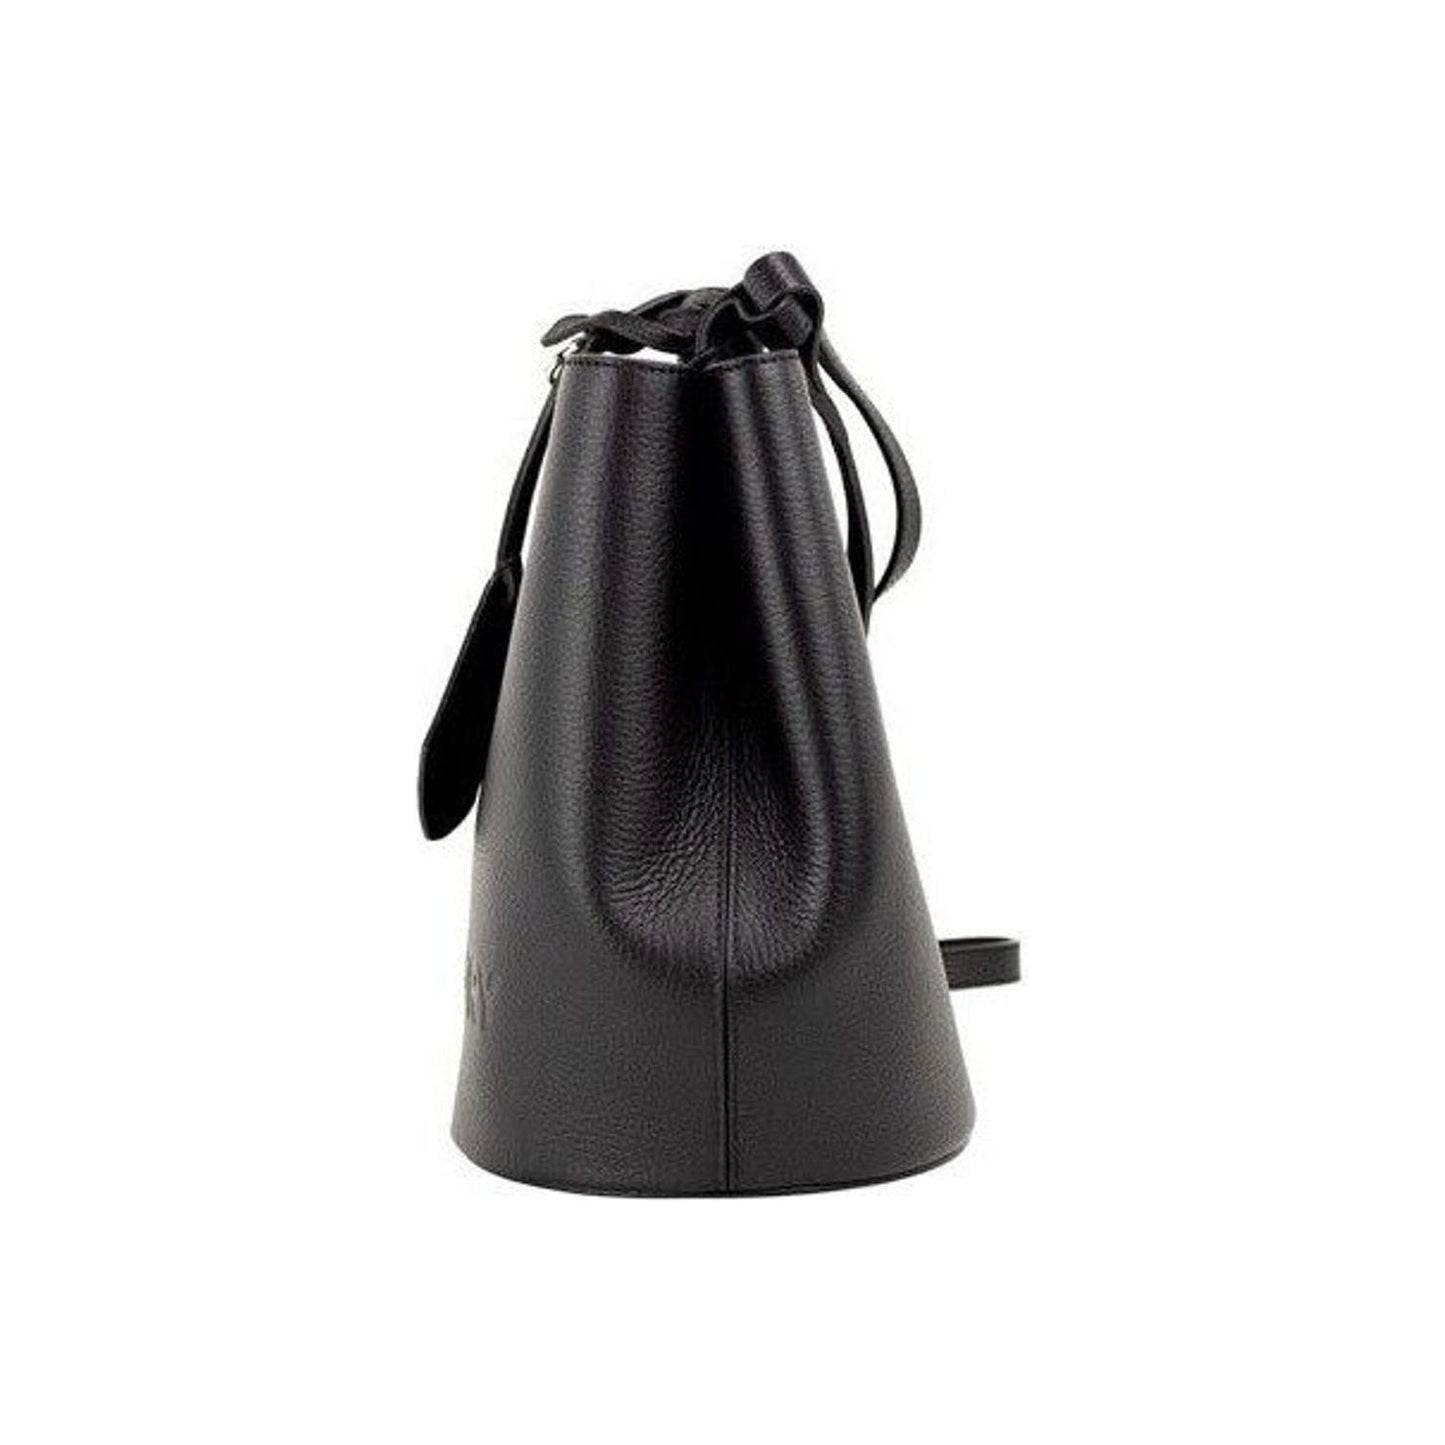 Burberry Lorne Small Black Pebbled Leather Bucket Crossbody Handbag Purse lorne-small-black-pebbled-leather-bucket-crossbody-handbag-purse